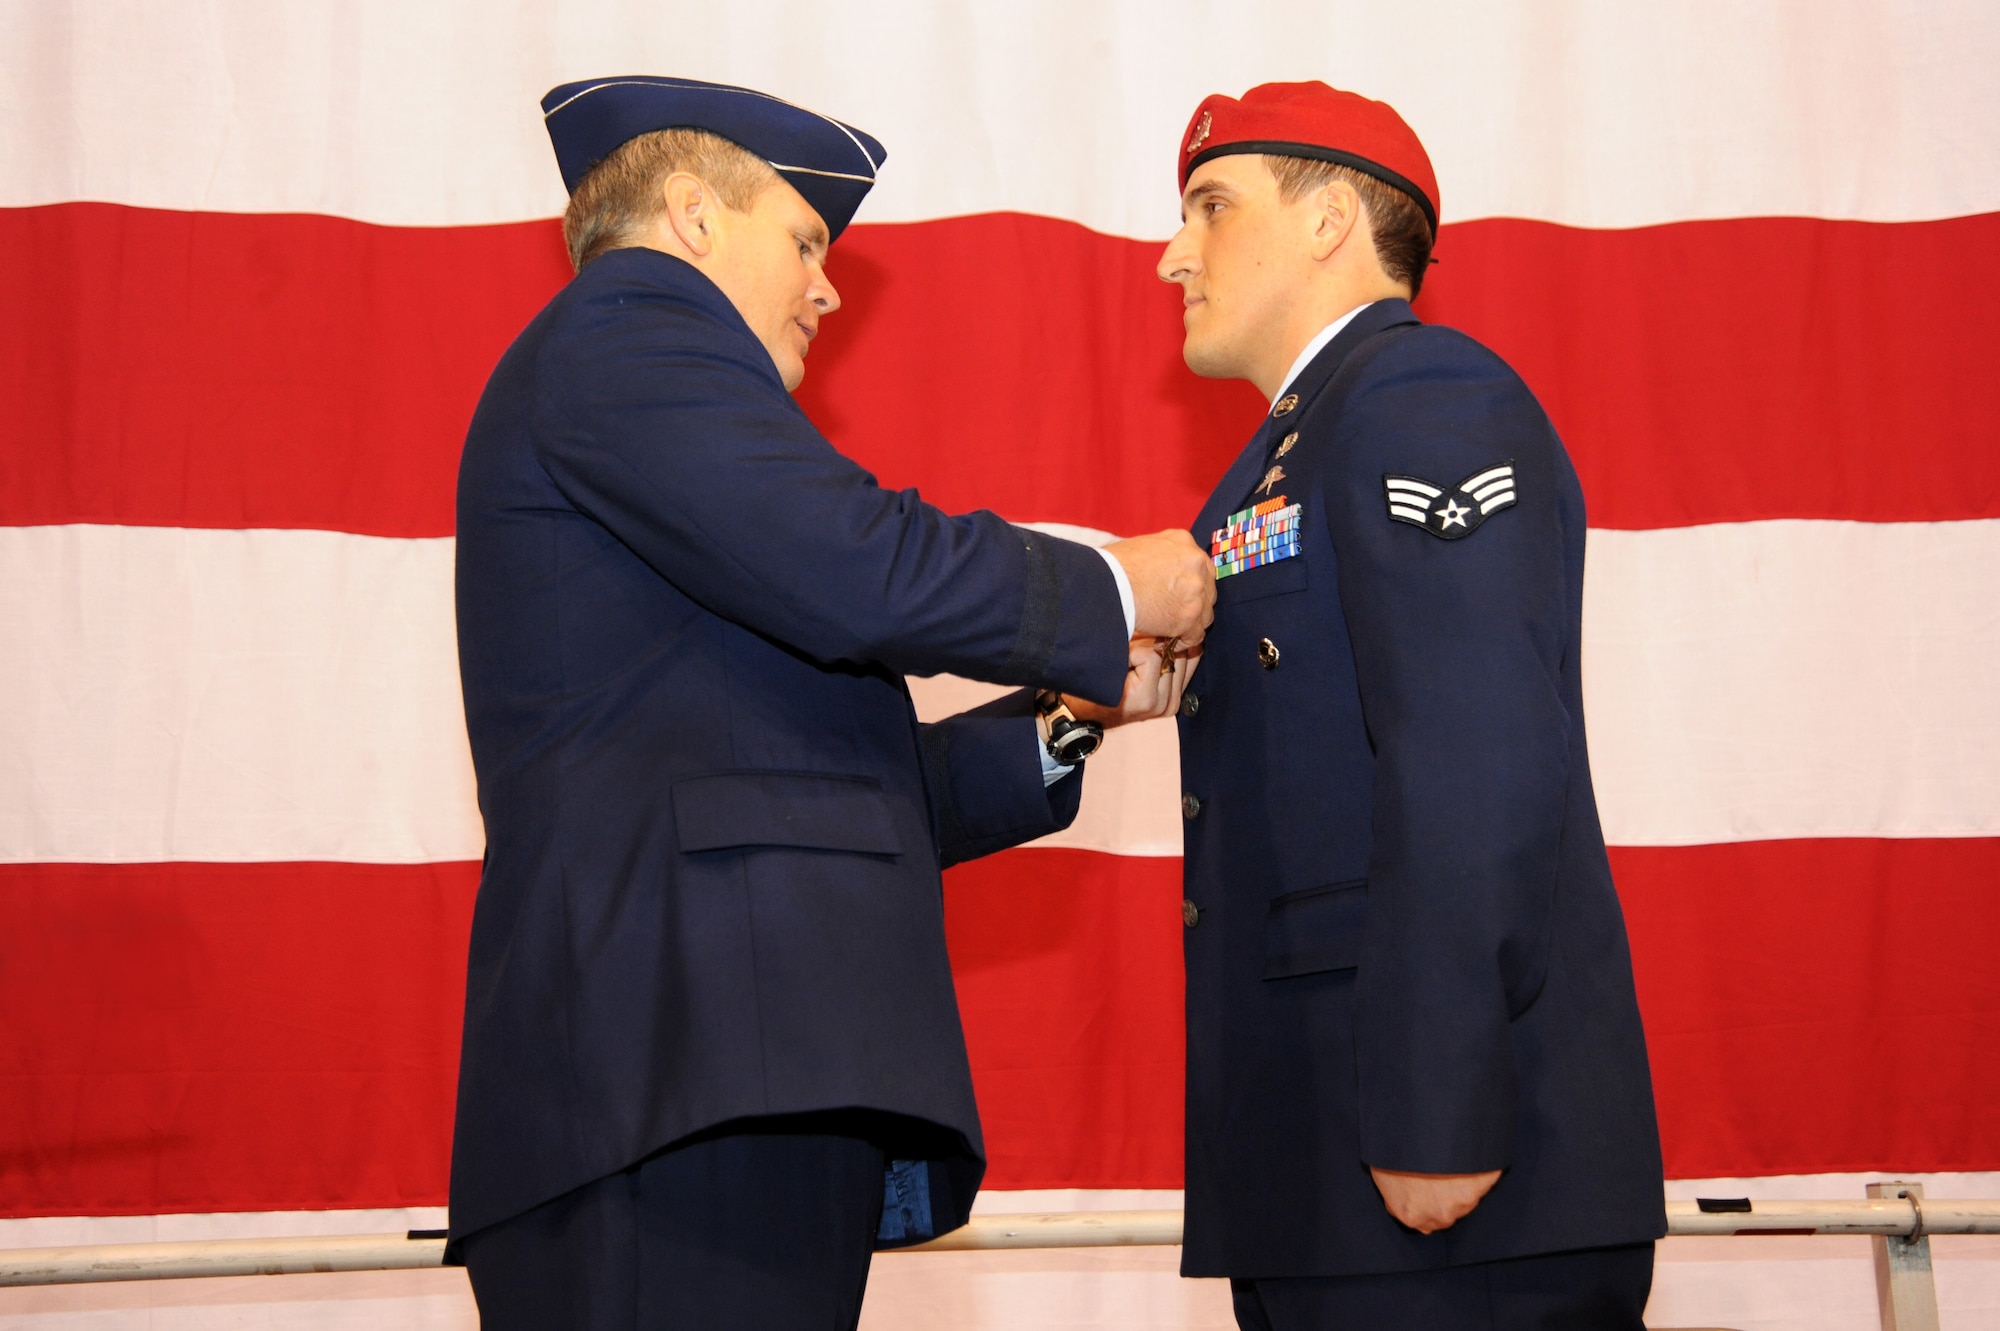 U.S. Air Force Lt. Gen. Eric E. Feil, commander of Air Force Special Operations Command, awards the Bronze Star Medal to Senior Airman Chadwick J. Boles of the 125th Special Tactics Squadron during an award ceremony held at the Portland Air National Guard Base, Portland, Ore., Jan. 23.  The event honored Airmen from the unit with five Bronze Star Medals and one Purple Heart medal.  The Airmen earned the medals during recent deployments to the Middle East. Fiel flew in from AFSOC headquarters at Hulburt Field, Fla., for the ceremony (U.S. Air Force photo by Tech. Sgt. John Hughel, 142nd Fighter Wing Public Affairs/Released)